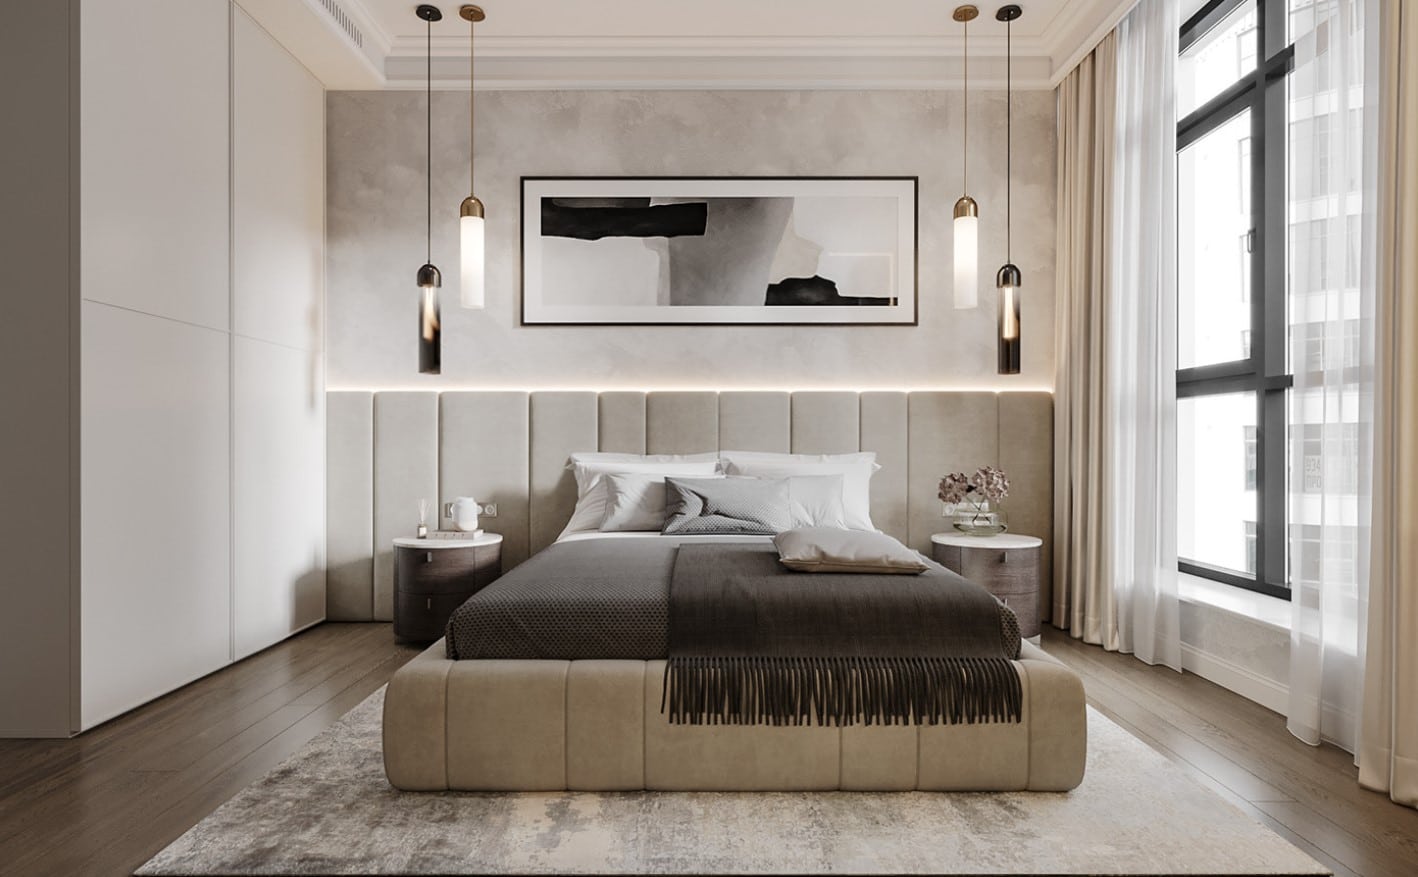 Luxury Bedrooms shop, Best Beds Cairo, Best Furniture Online shopping In Egypt